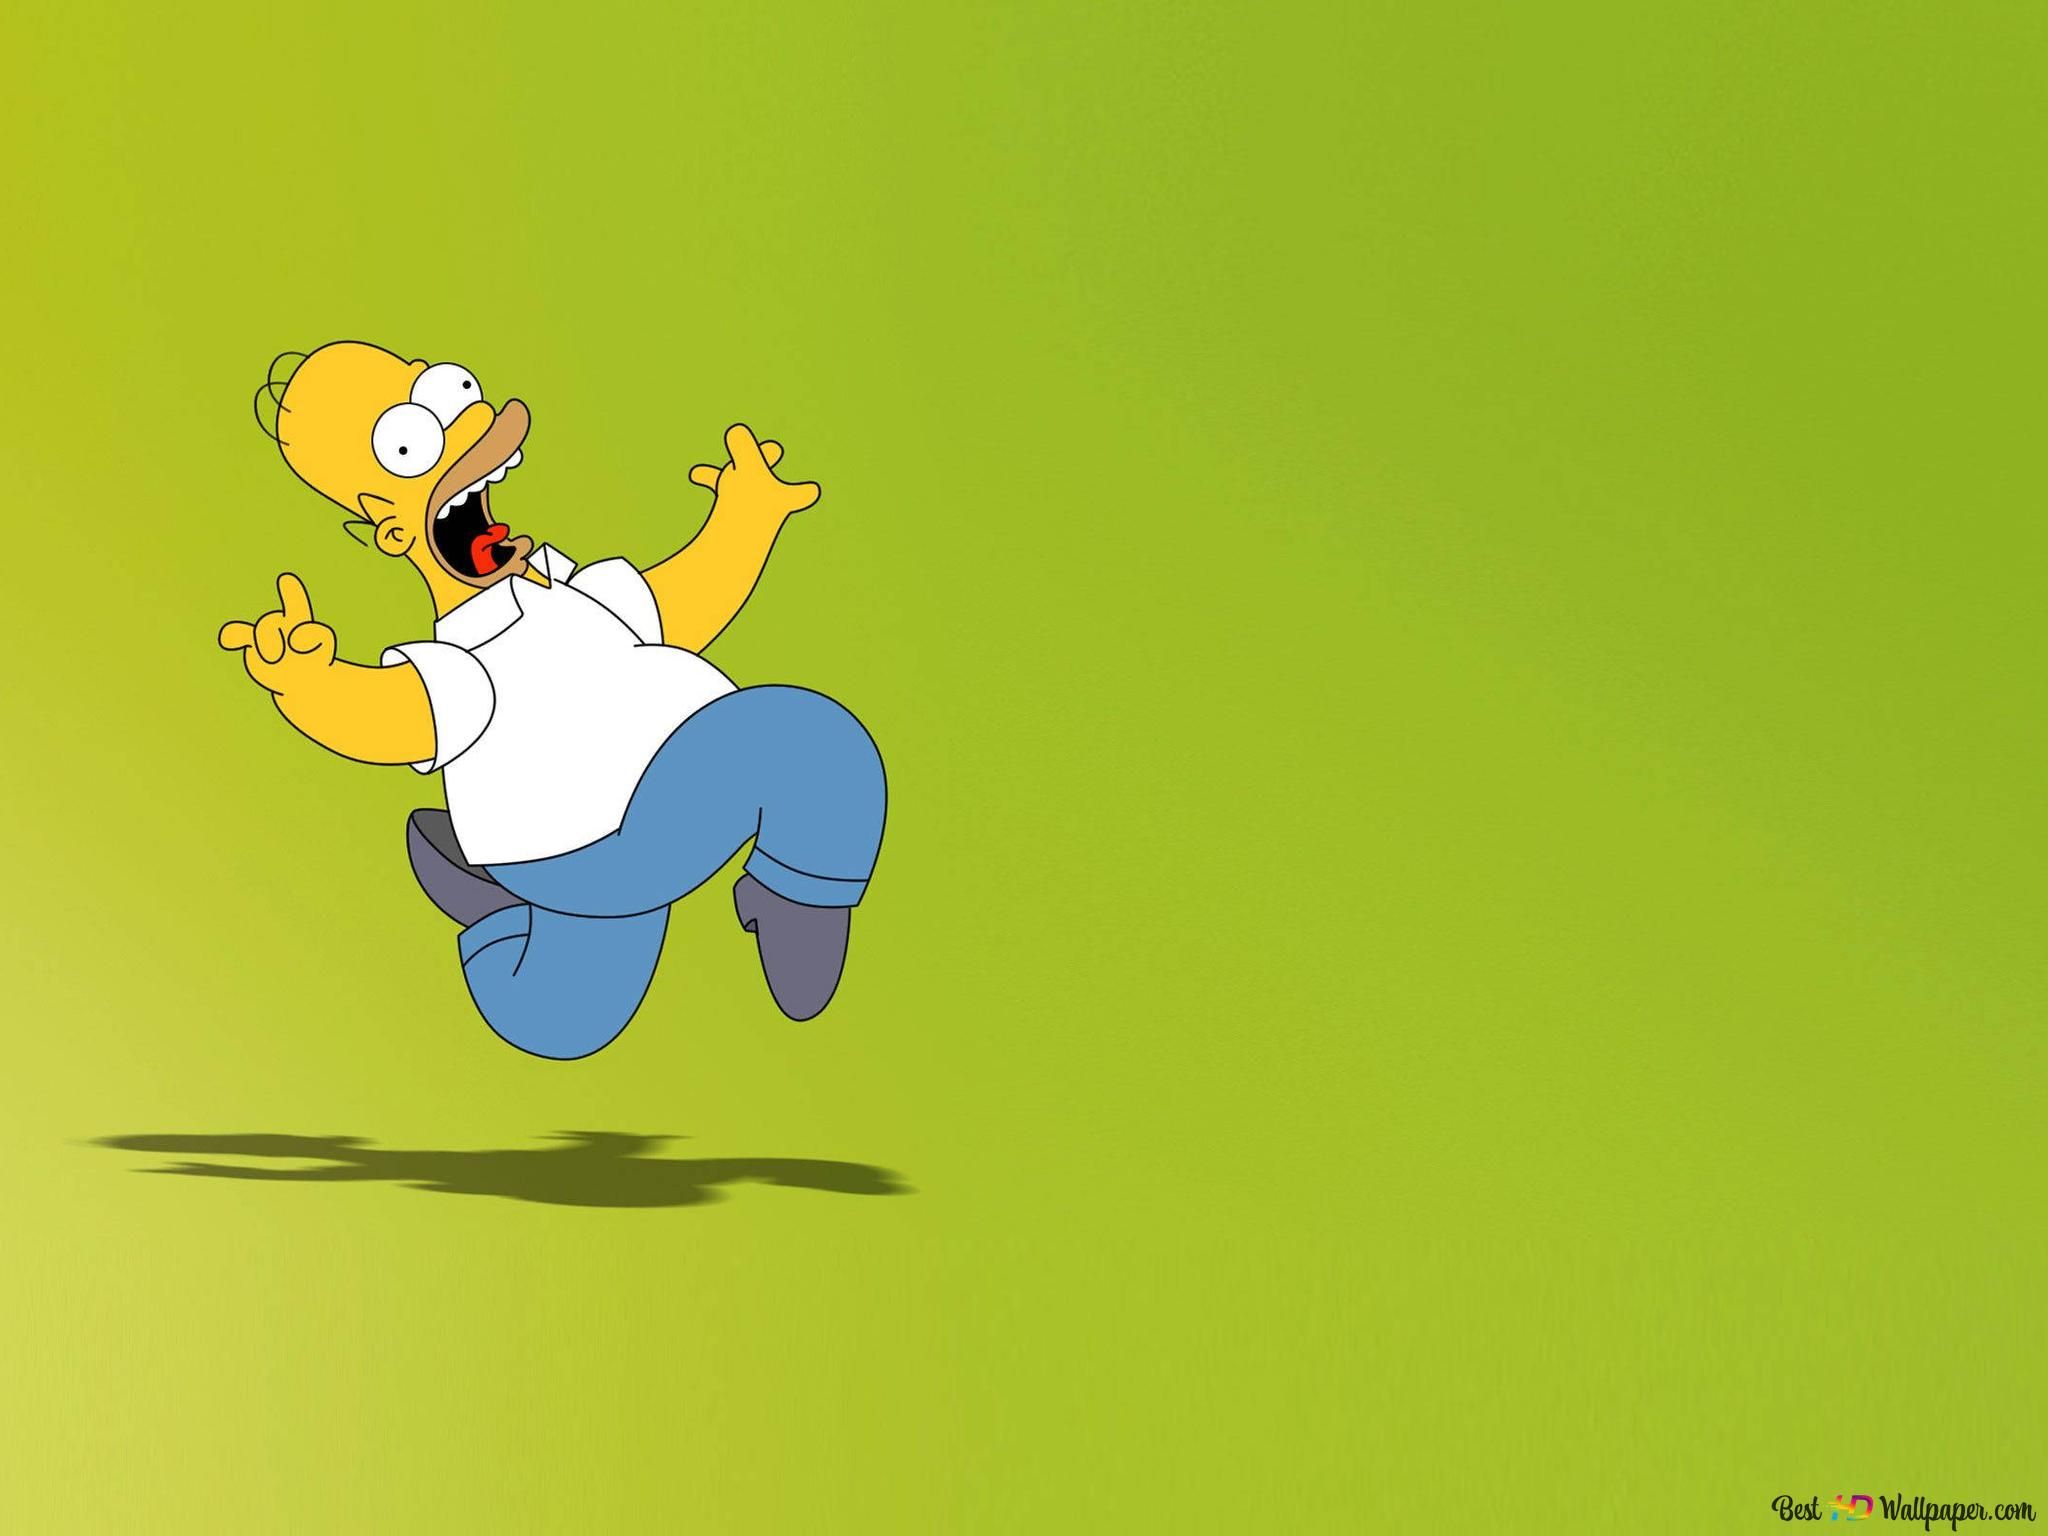 Anxious states of The Simpsons cartoon character Homer Simpson 2K wallpaper download